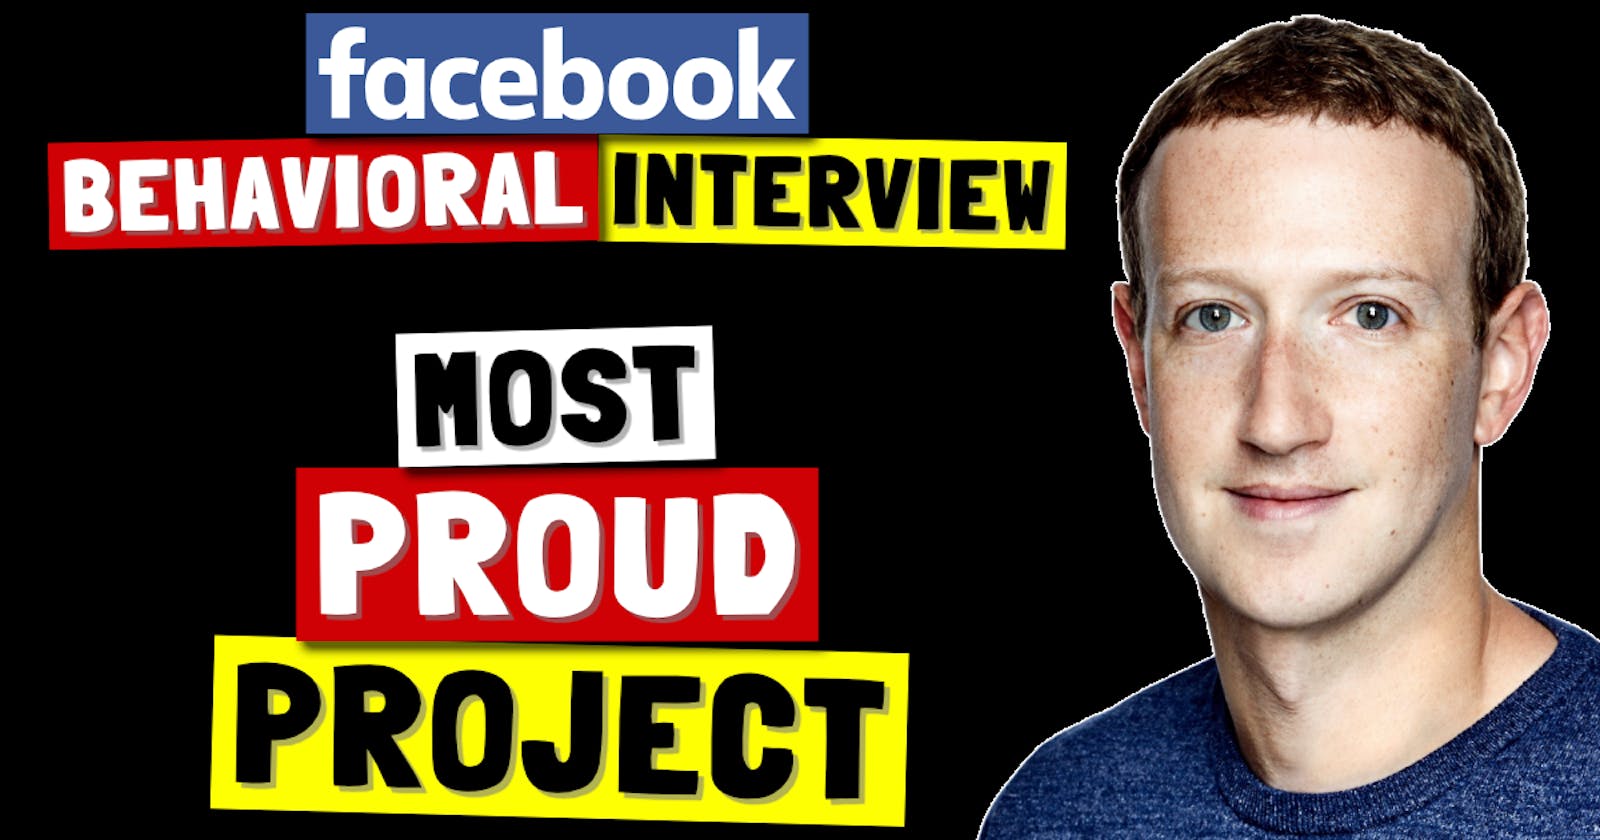 ✅ Tell Me About The Project That You Are Most Proud Of | Facebook Behavioral (Jedi) Interview Series 🔥